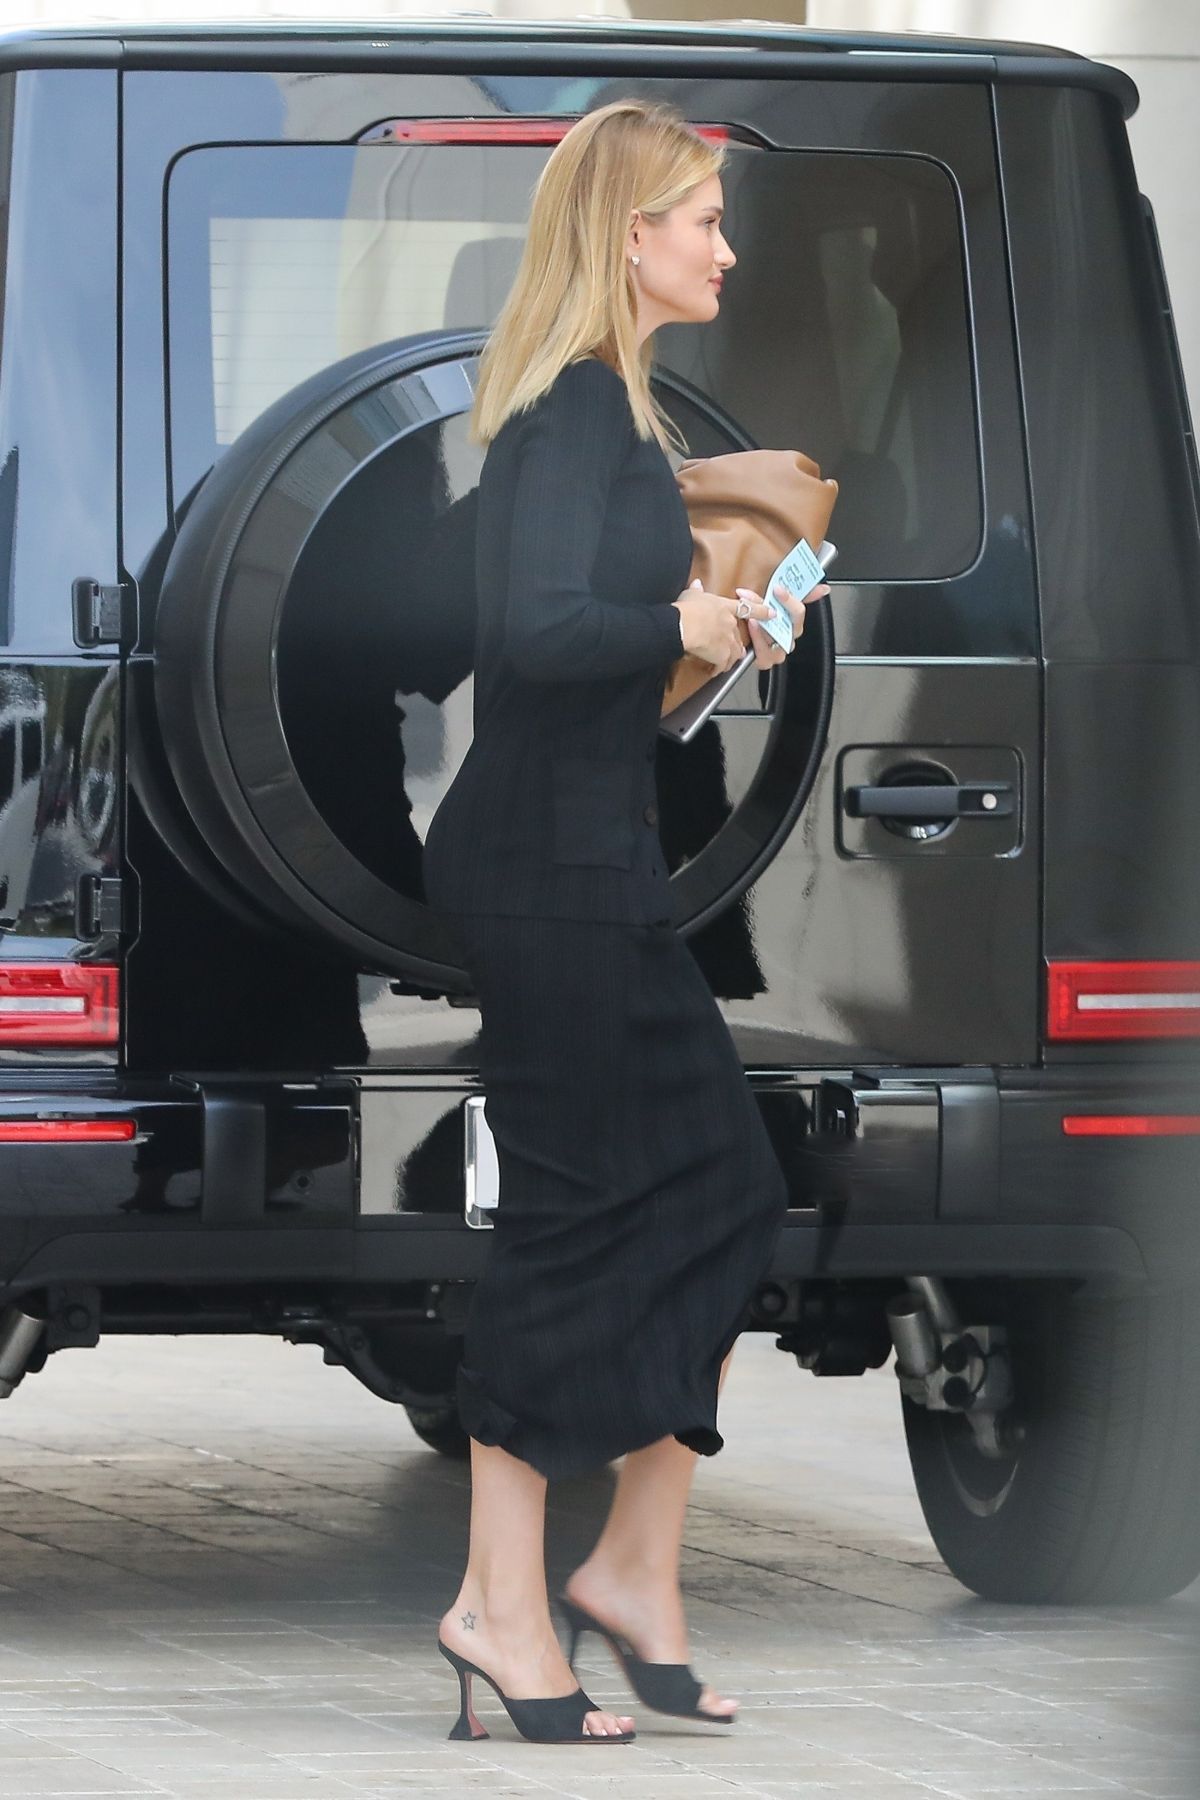 rosie-huntington-whiteley-out-and-about-in-beverly-hills-04-09-2019-6.jpg